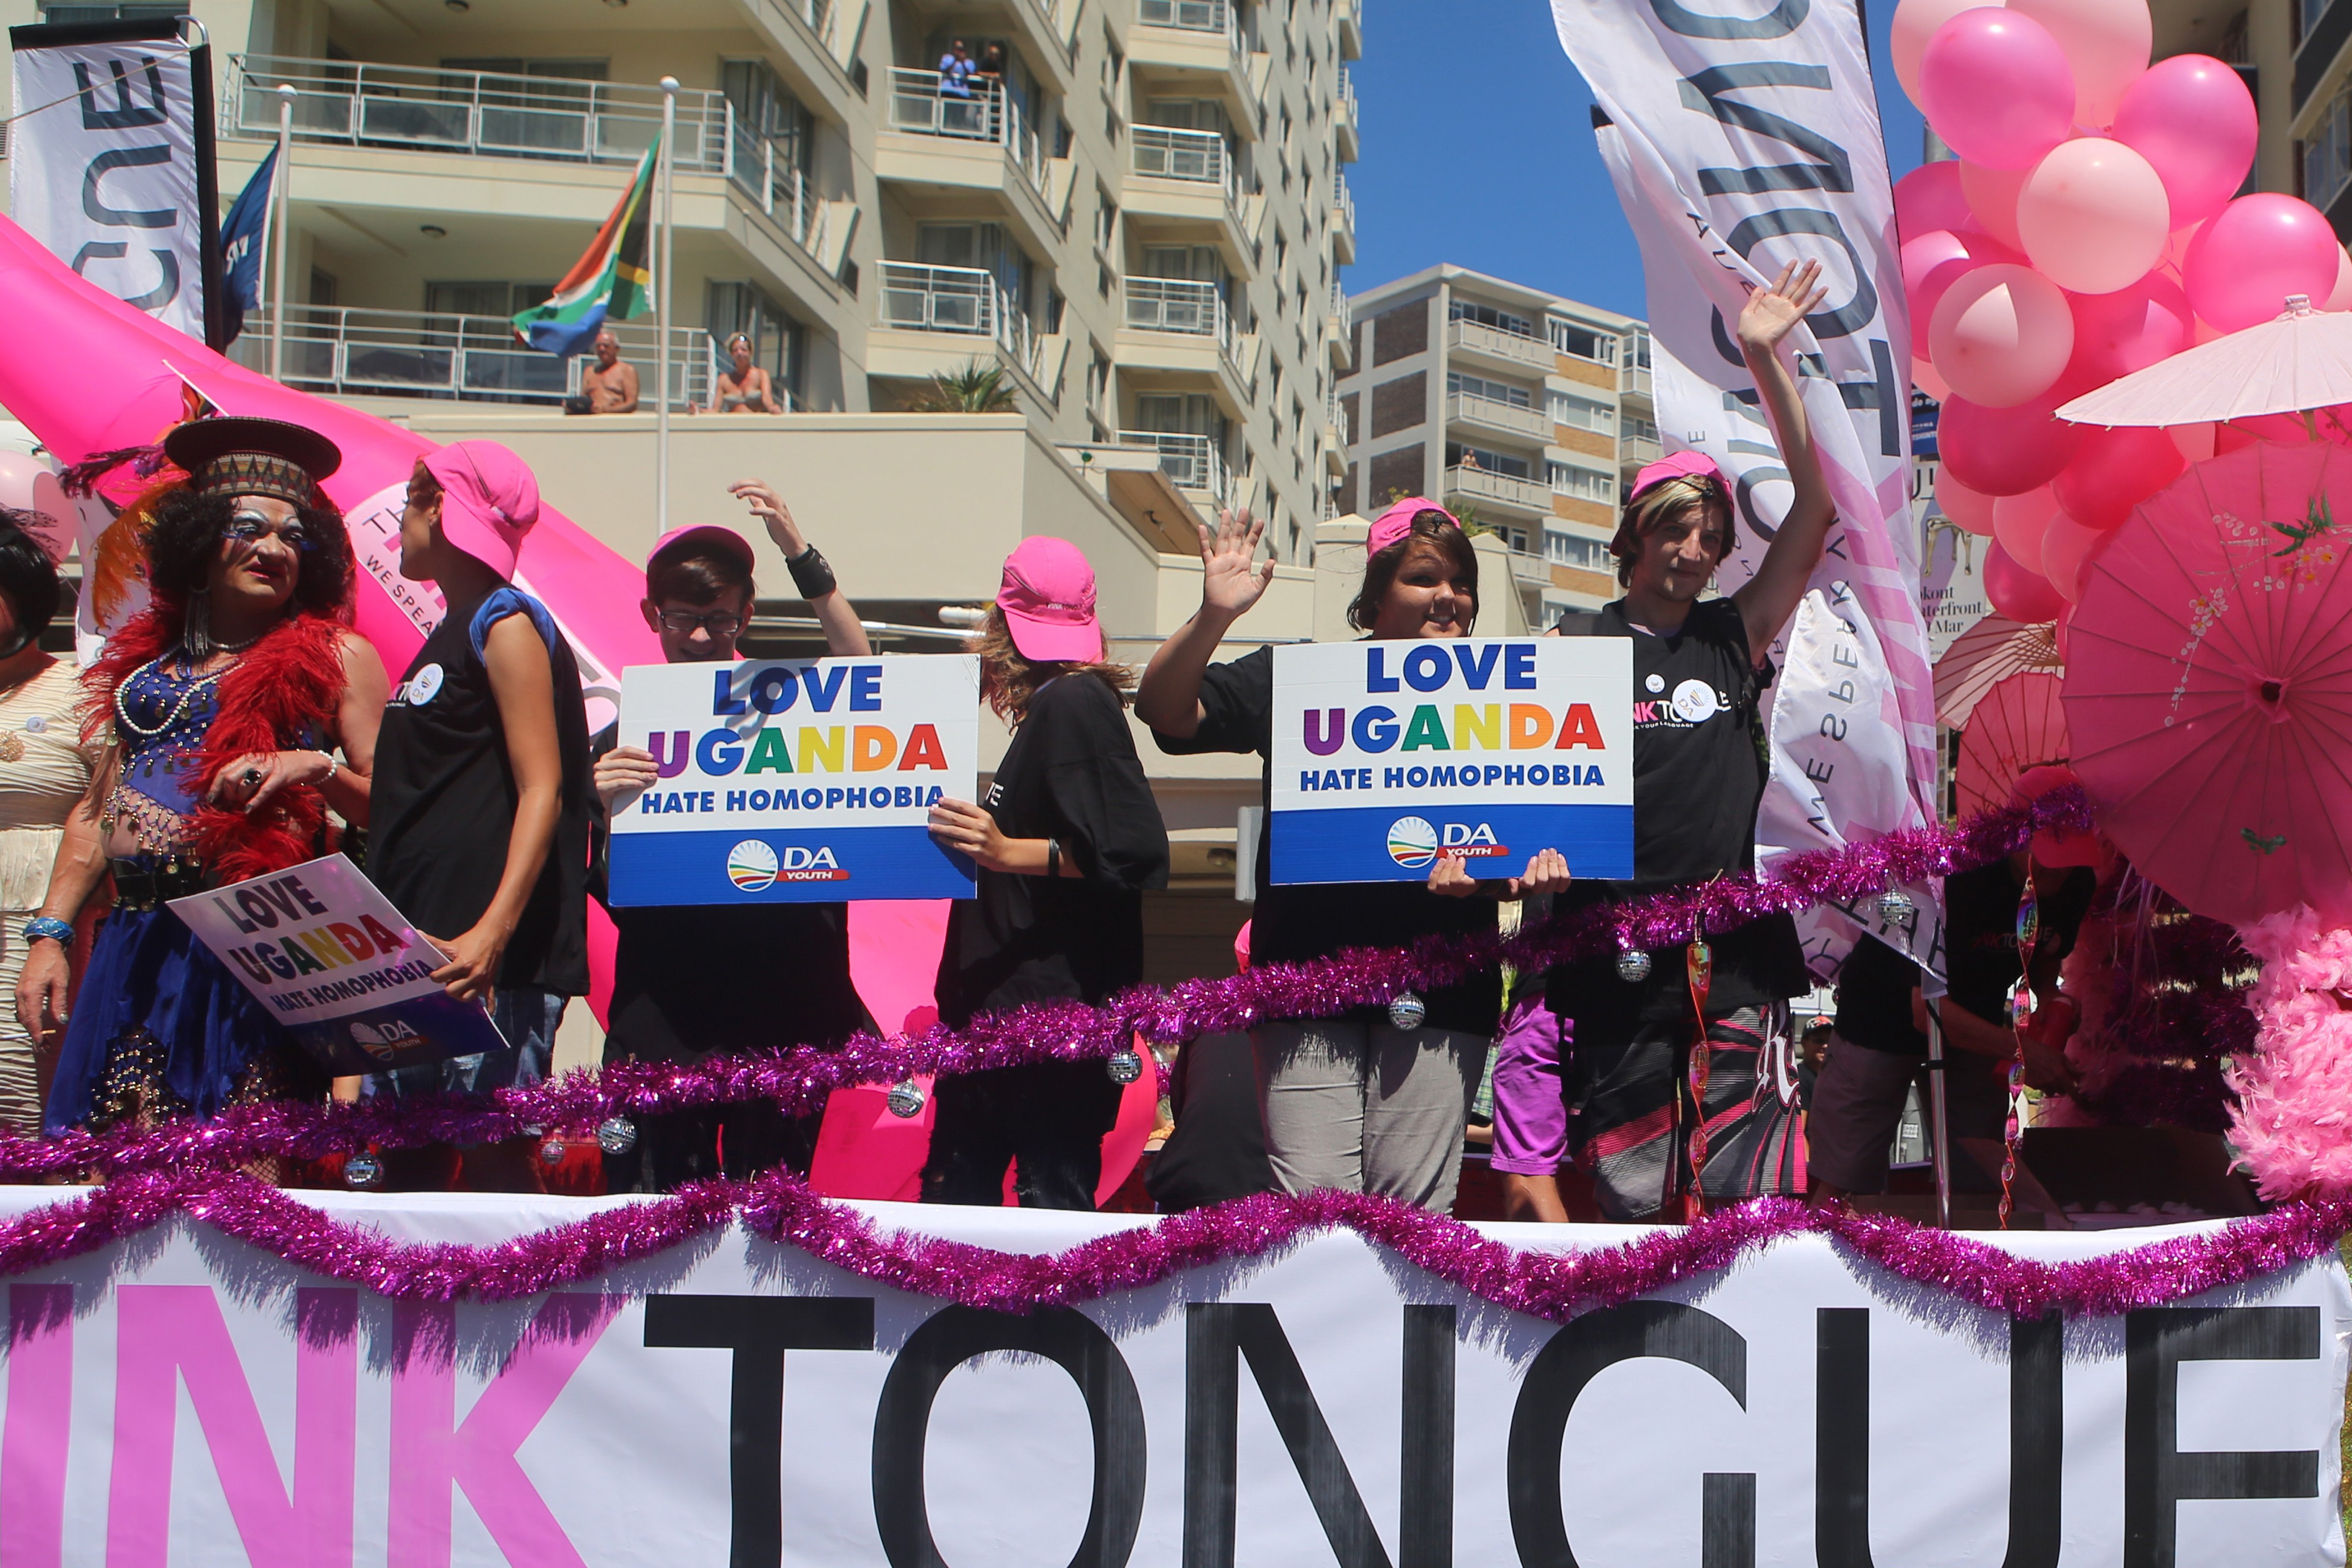 People stand on a float holding signs saying 'Love Uganda, hate homophobia' in reaction to Uganda's law banning homosexuality in Cape Town, South Africa, on March 1, 2014. (Jennifer Bruce—AFP/Getty Images)